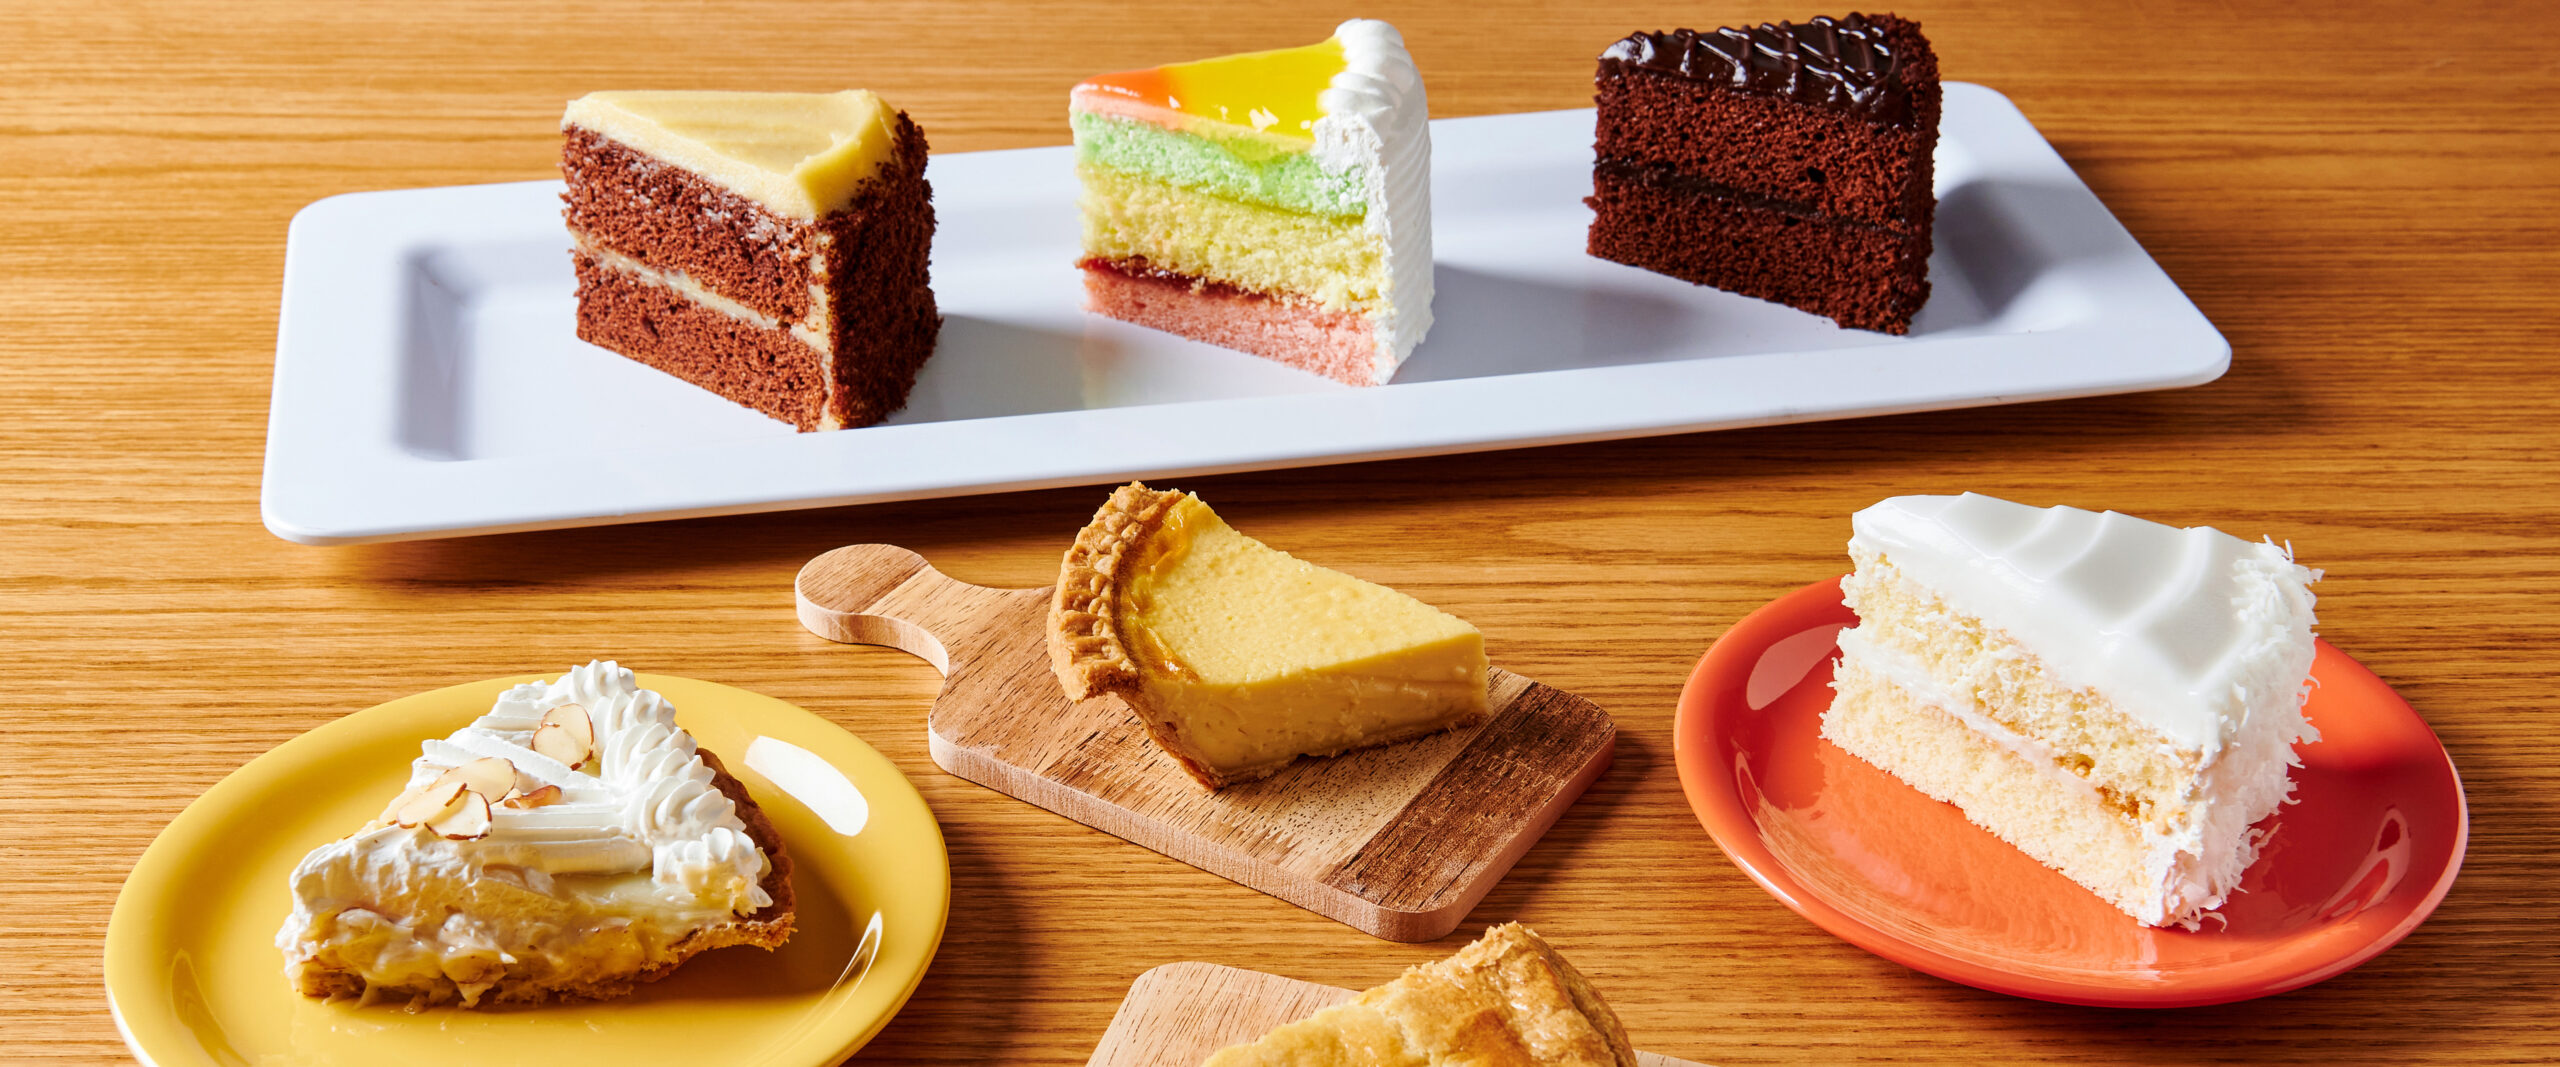 Slices of assorted cakes and pies